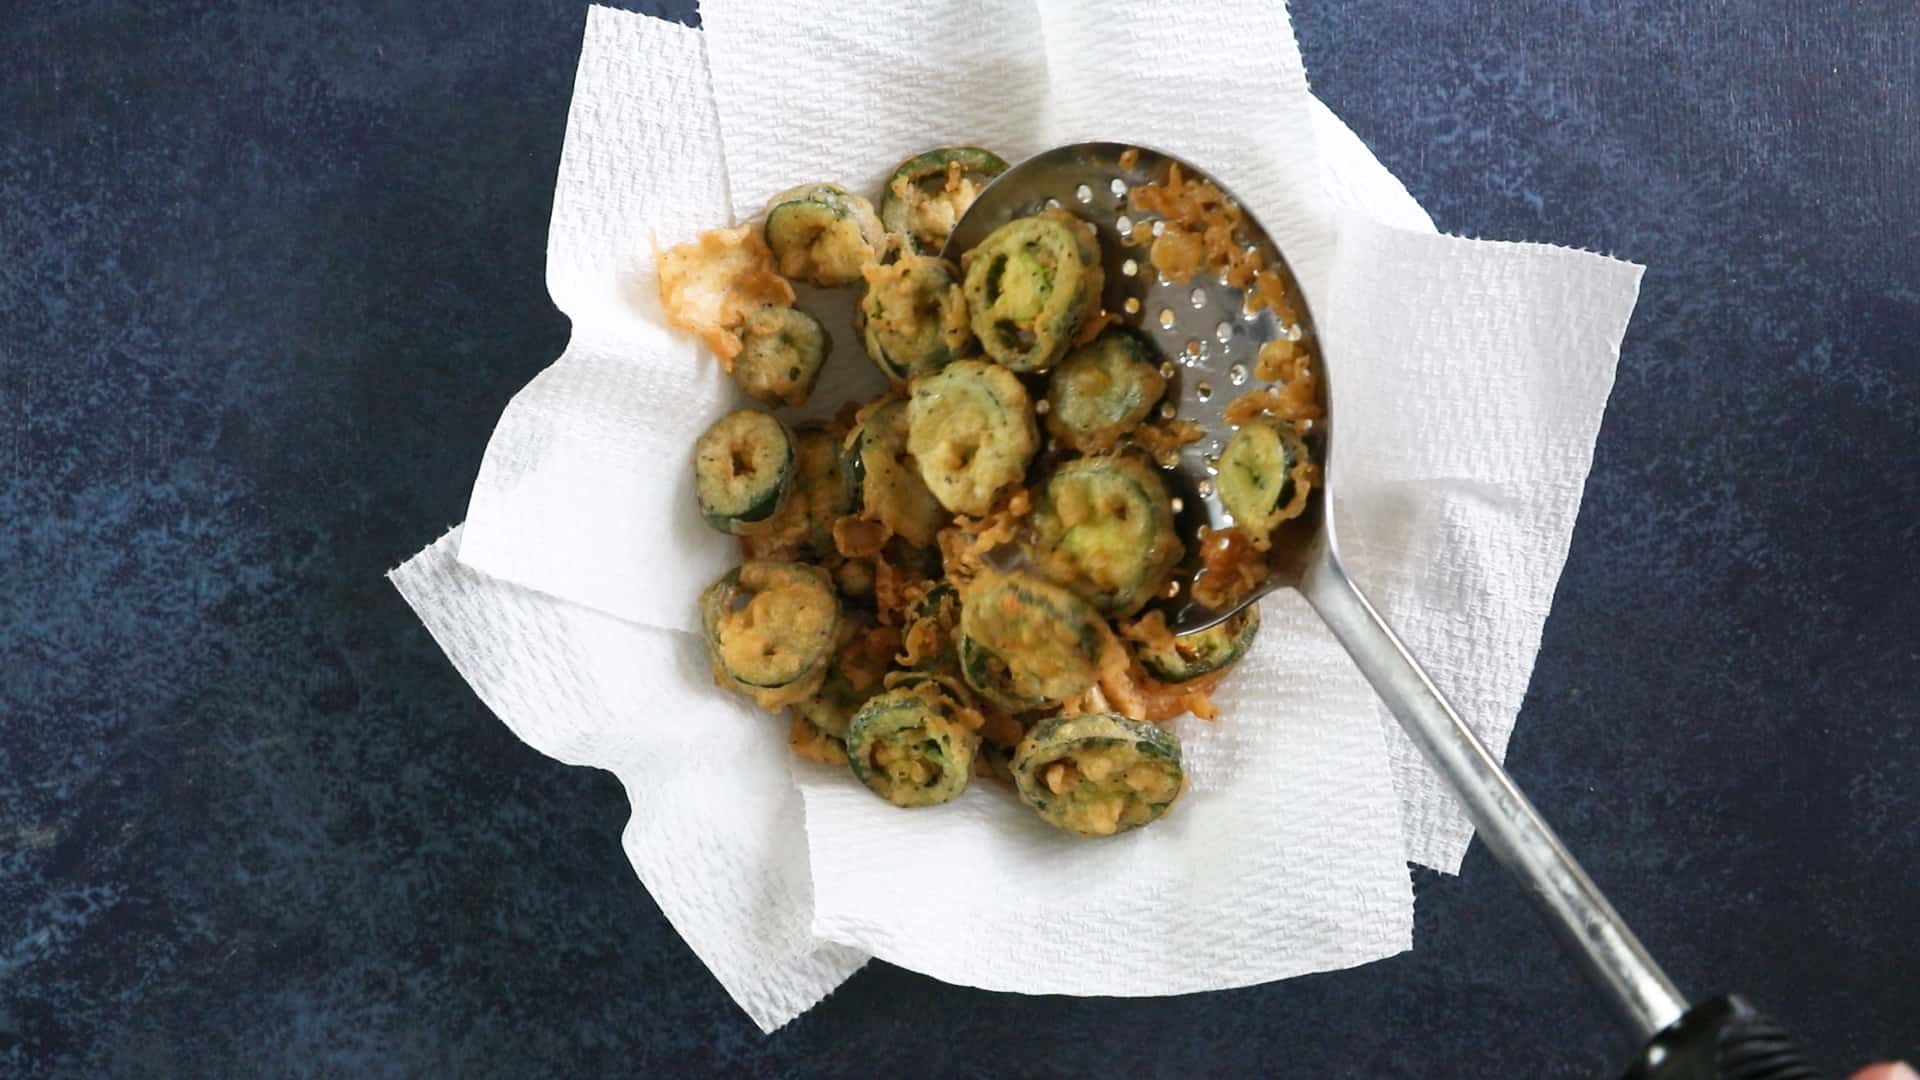 Drain the fried jalapeno peppers on paper towels